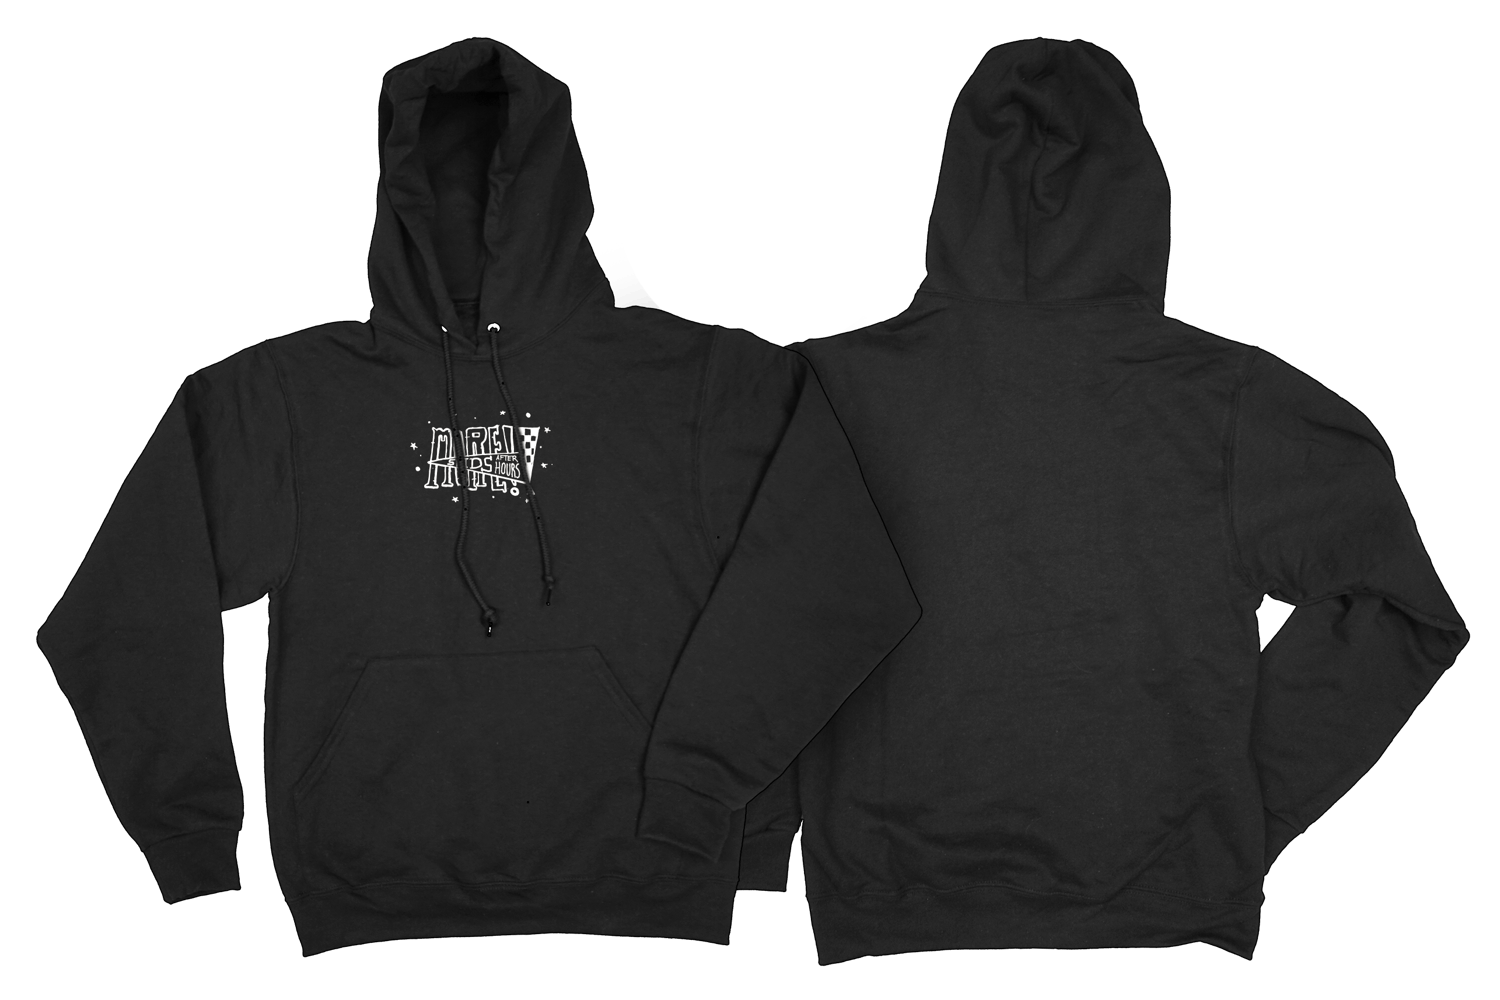 More Skids After Hours hoodie